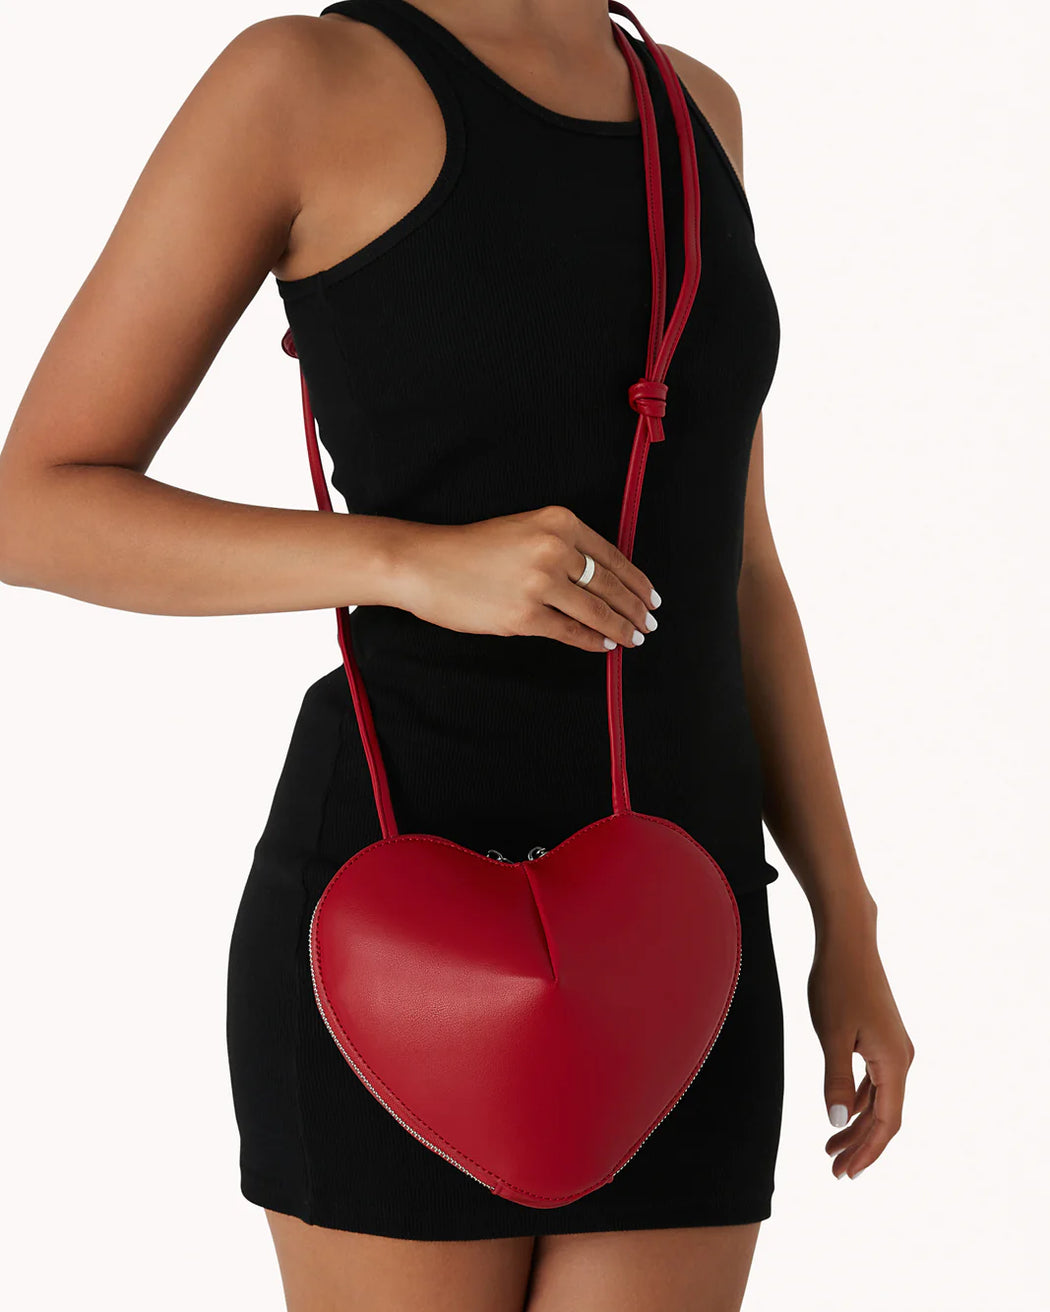 RED HEART PURSE